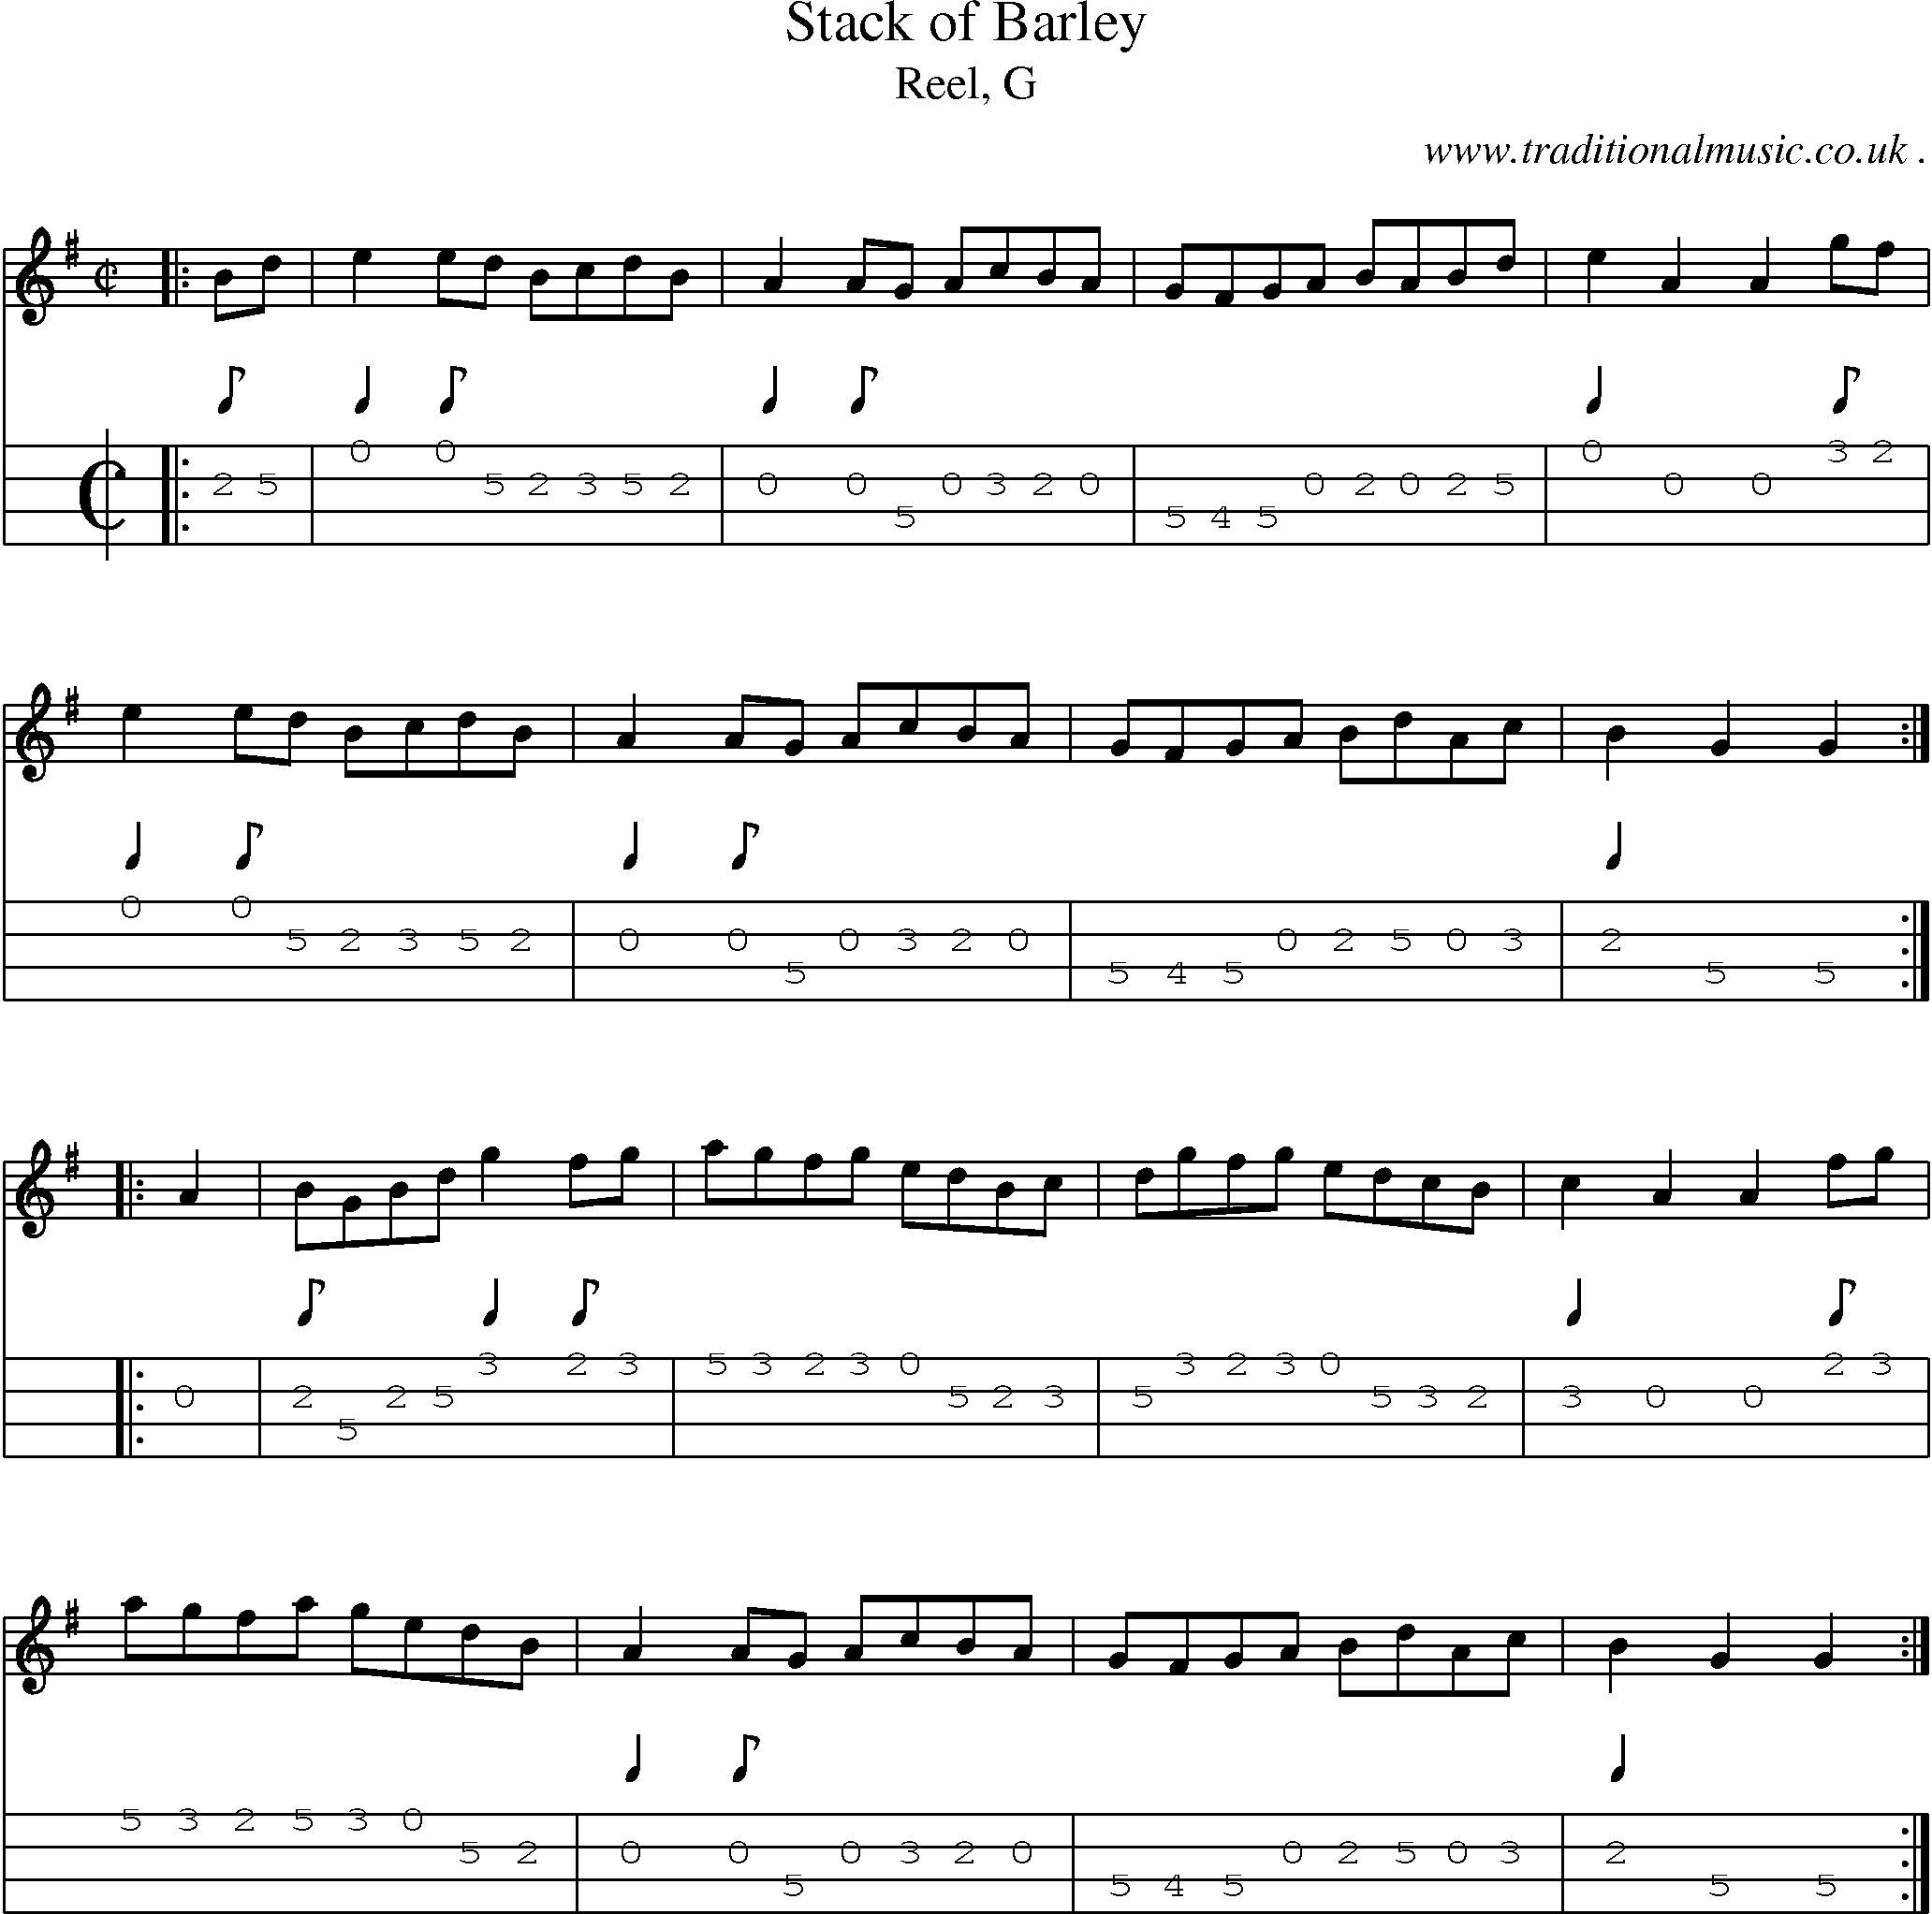 Sheet-music  score, Chords and Mandolin Tabs for Stack Of Barley